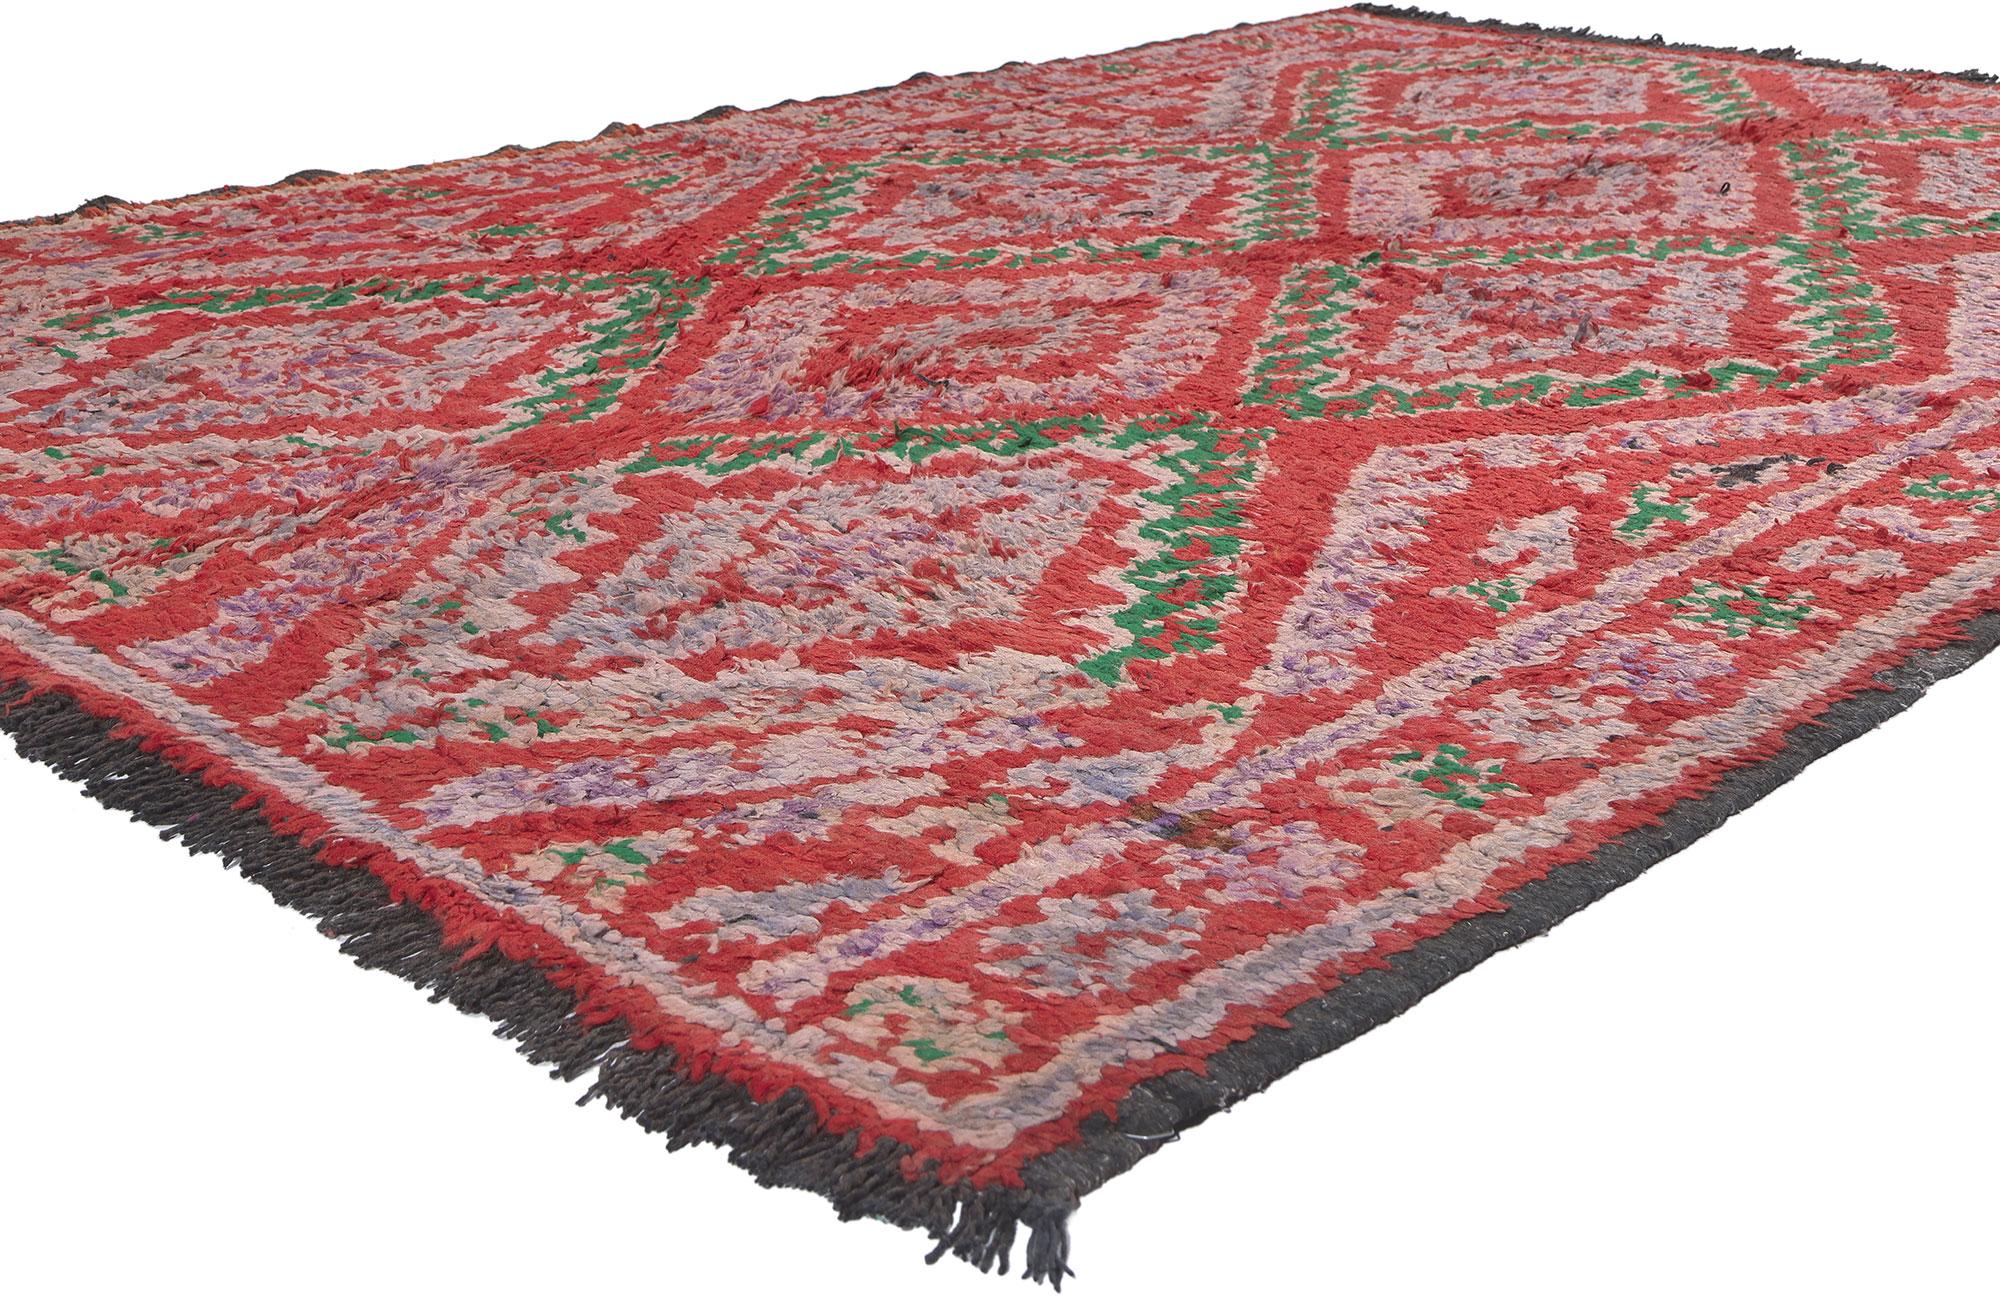 20208 Vintage Red Talsint Moroccan Rug, 05'10 X 08'04. This hand knotted wool vintage Talsint Moroccan rug is not merely a floor covering; it's a symphony of symbols and meanings woven into a captivating masterpiece. Bursting with maximalist flair